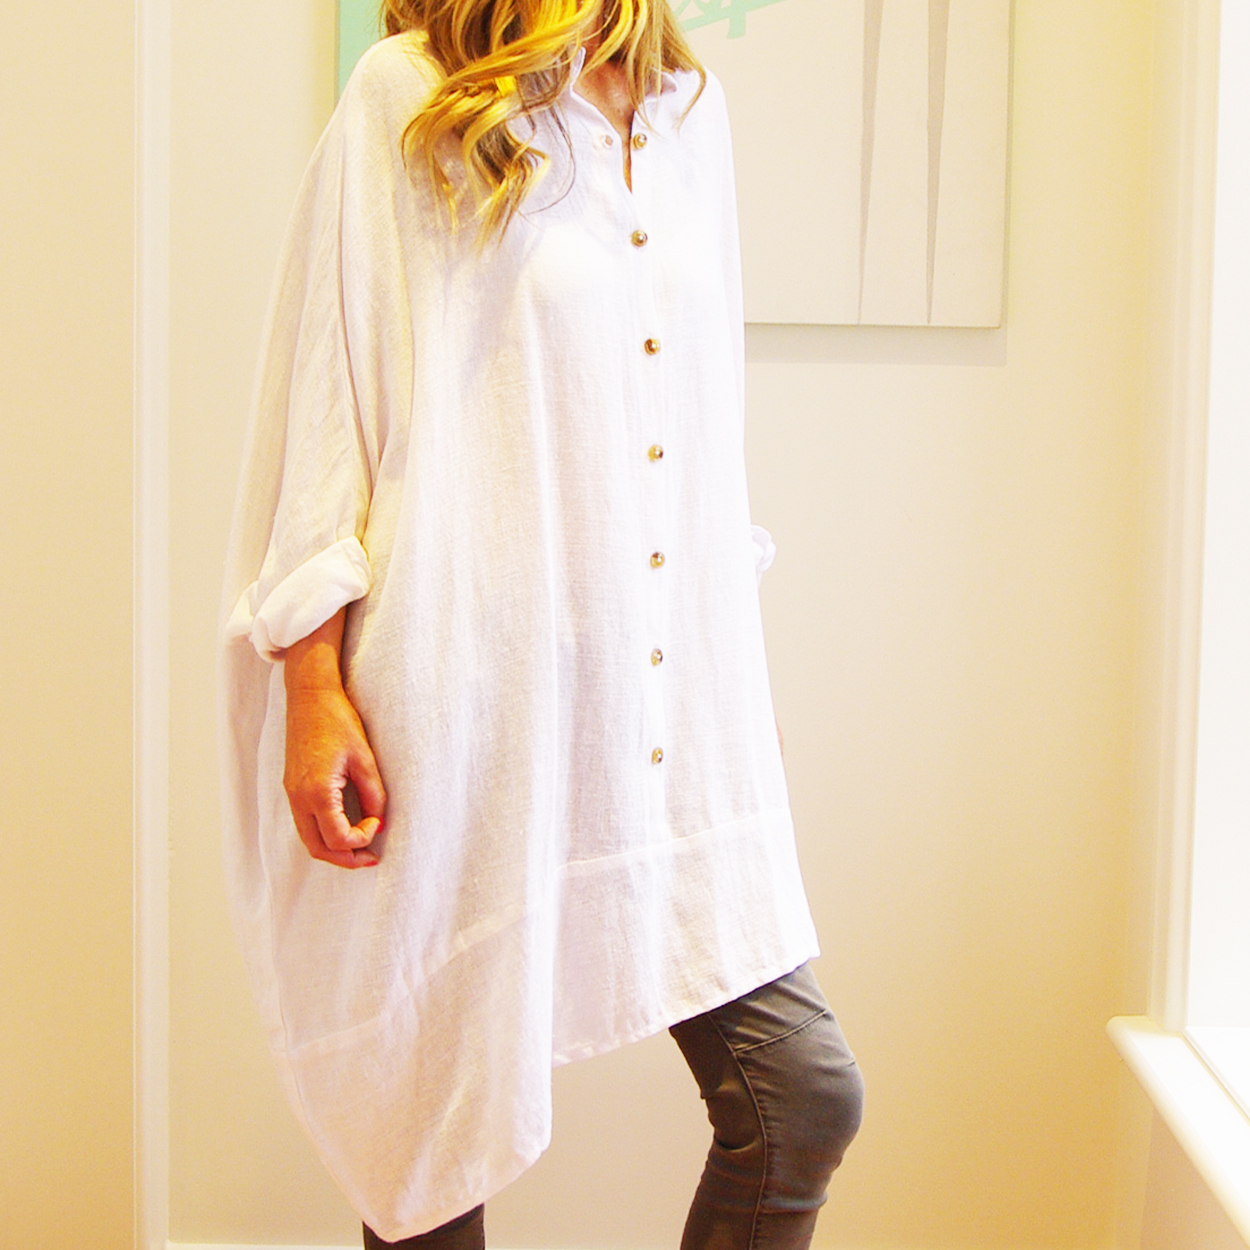 Linen Women's Clothing in Australia for boutiques and lifestyle stores.